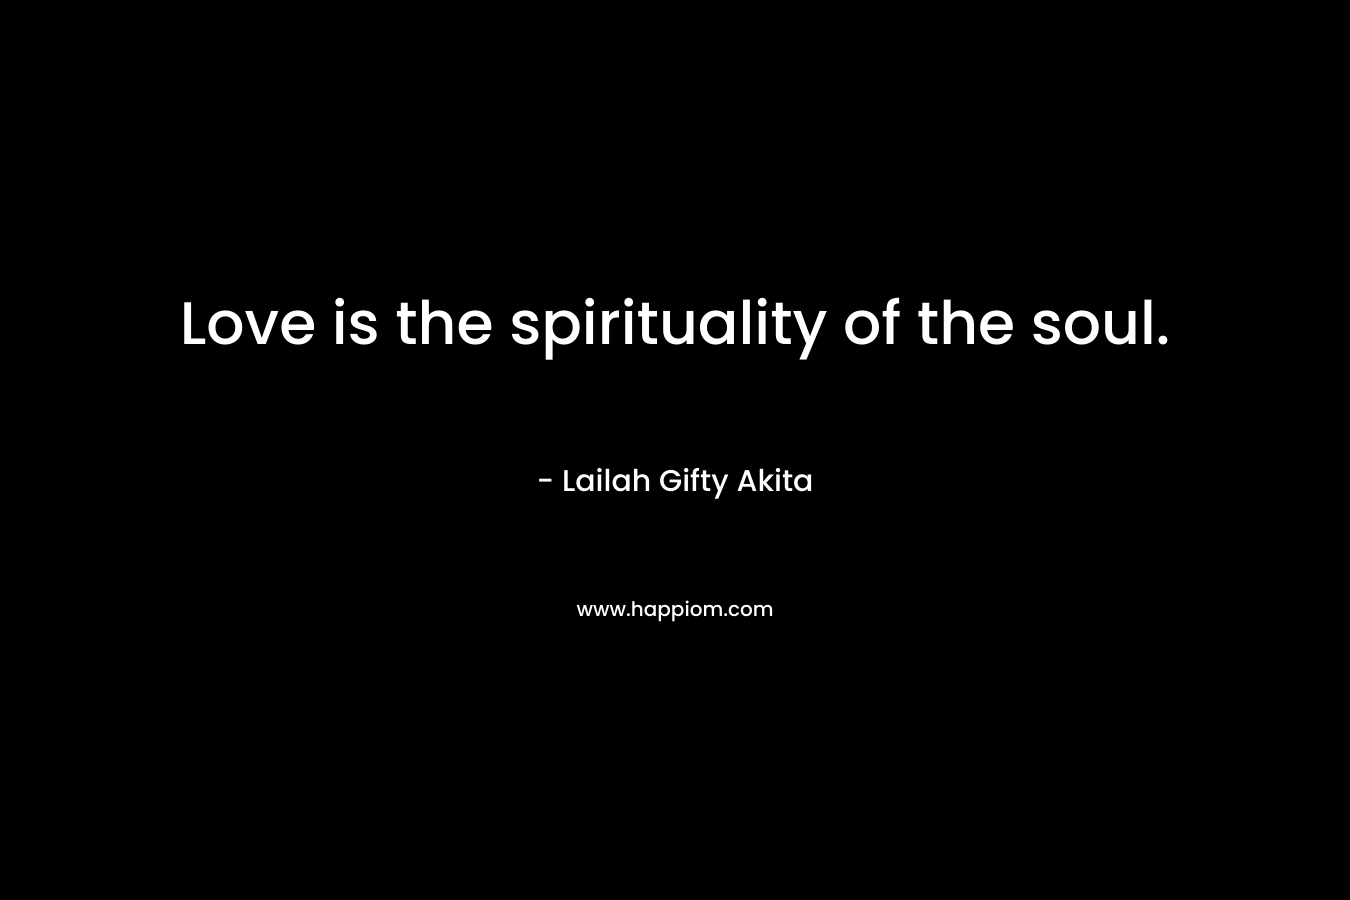 Love is the spirituality of the soul.